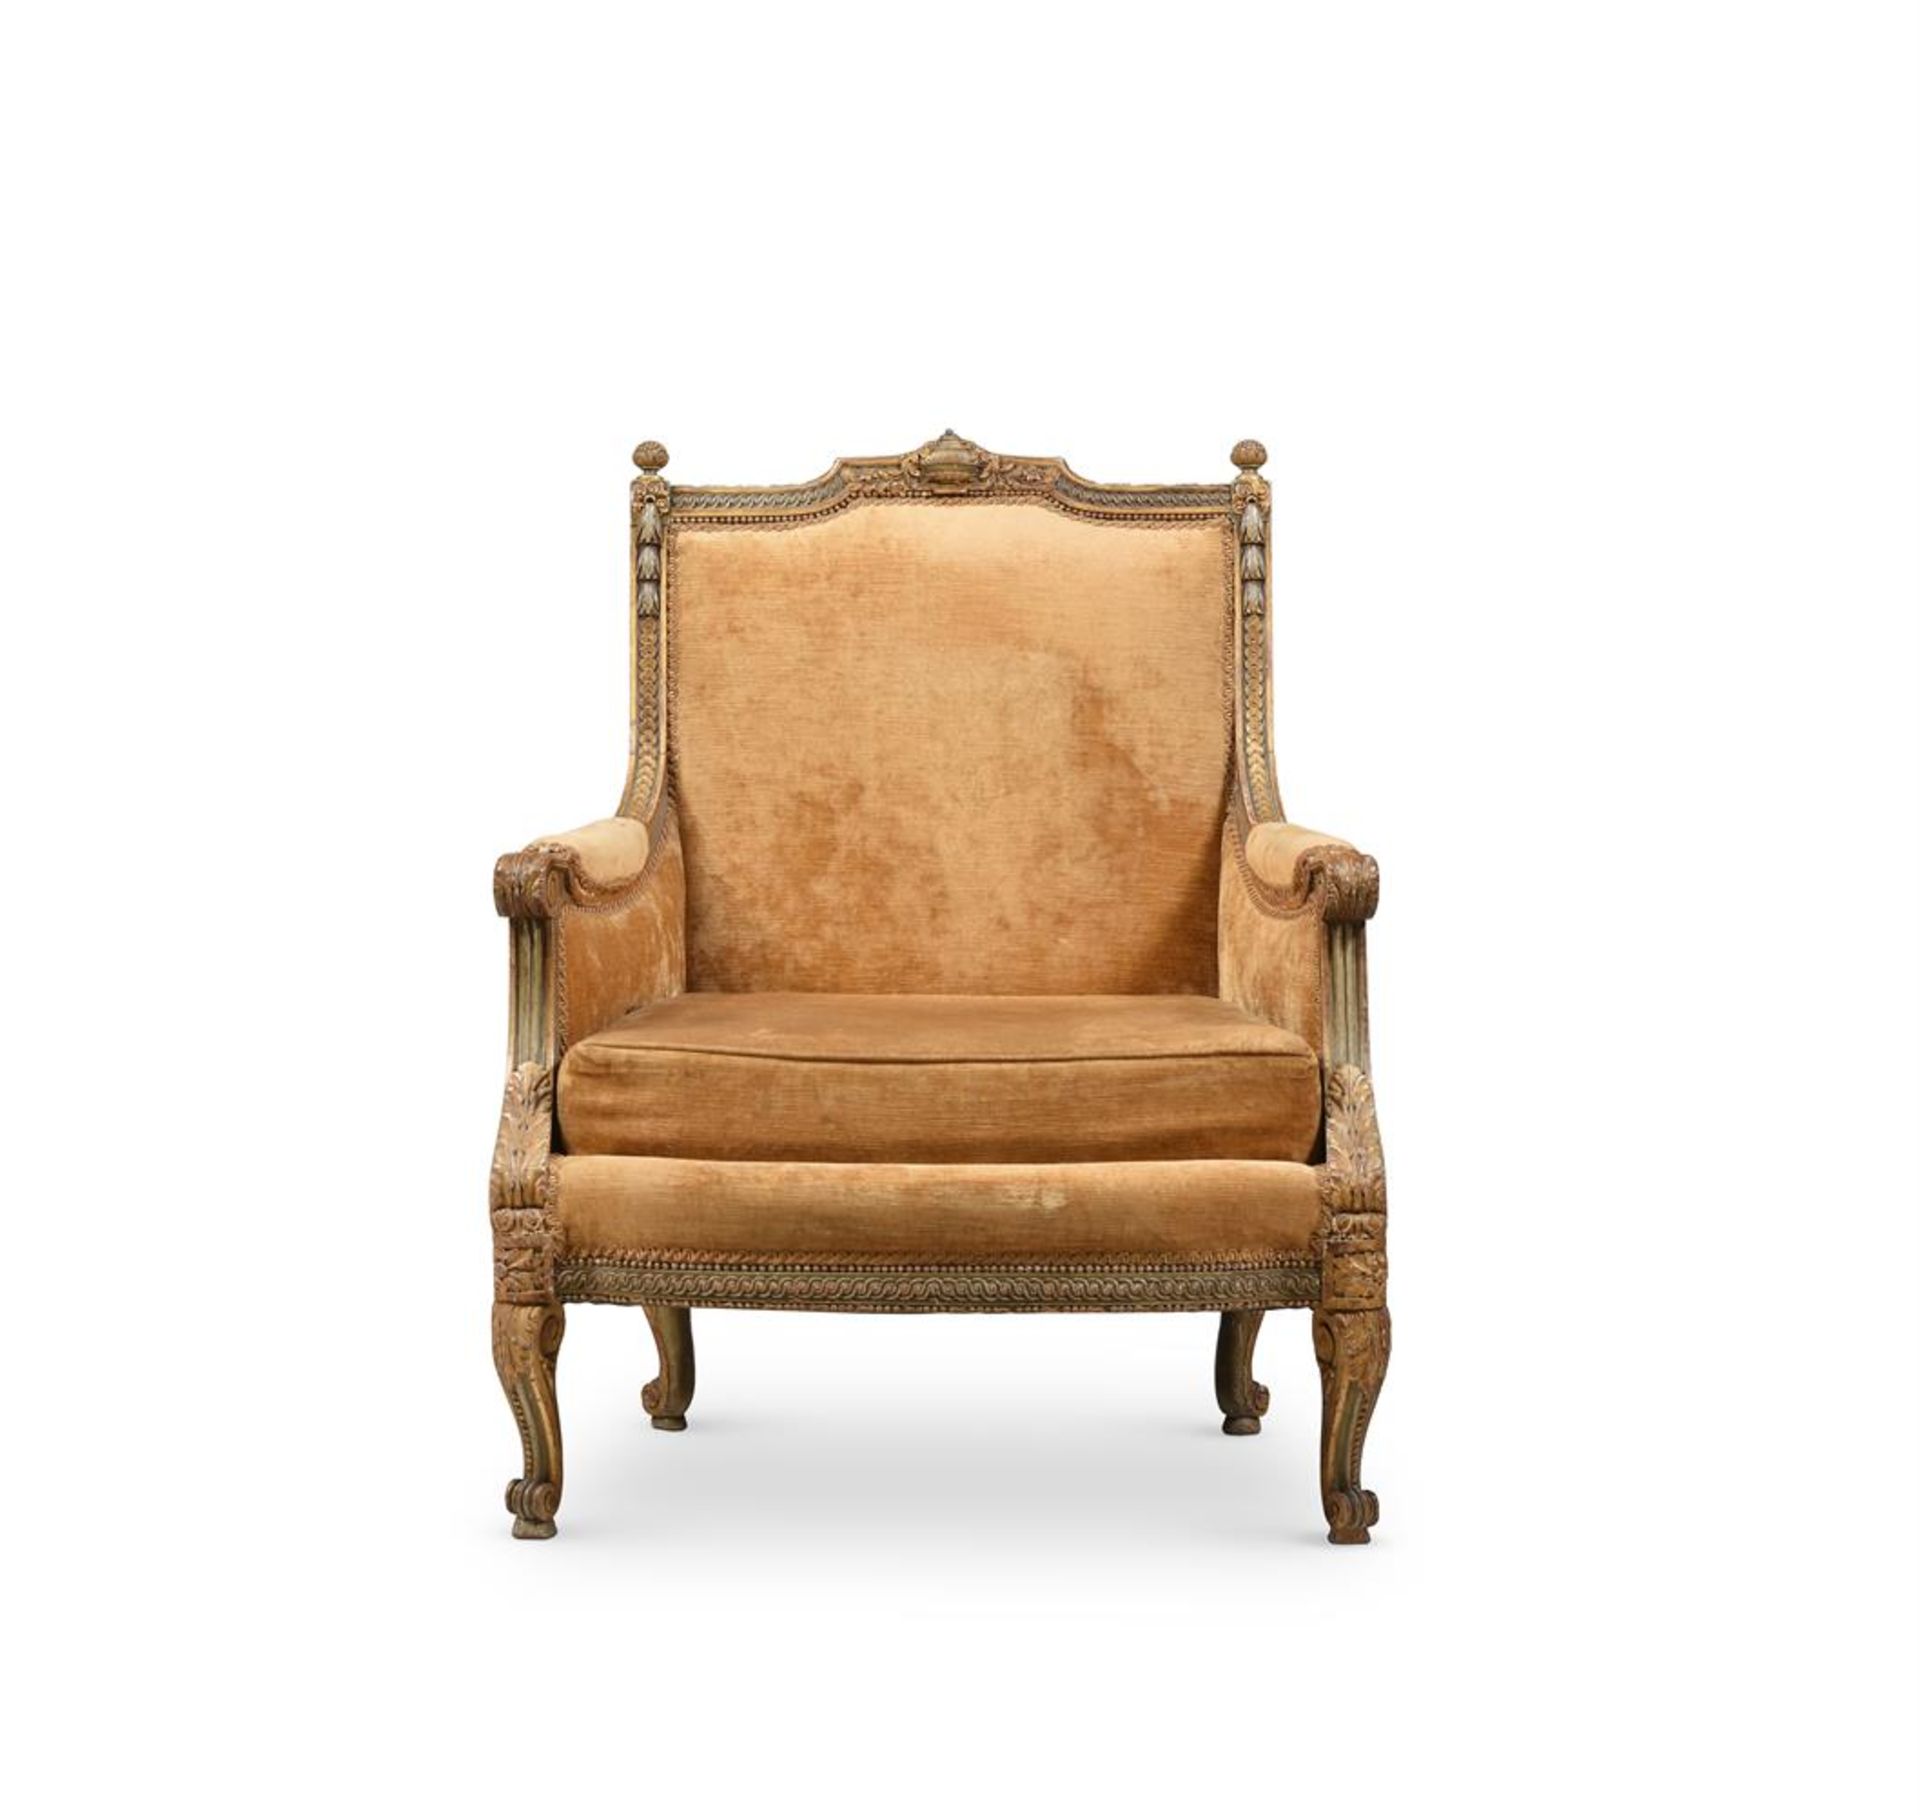 A LARGE PARCEL GILT, PAINTED AND UPHOLSTERED ARMCHAIR, IN THE MANNER OF GEORGES JACOB, 19TH CENTURY